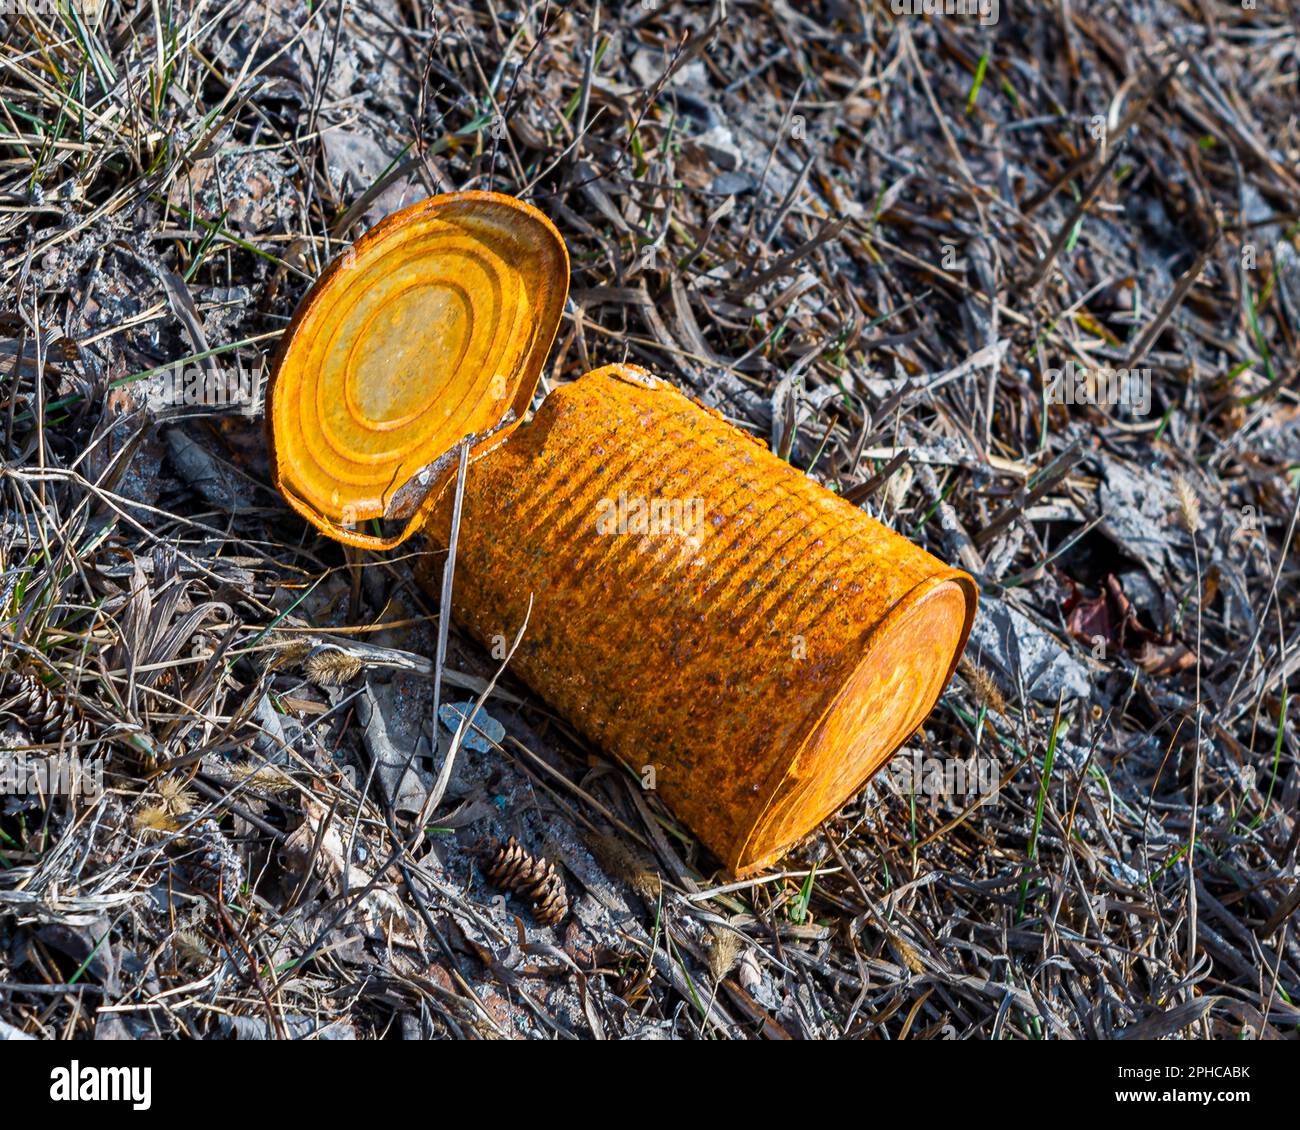 Dirty environment. A metal tin can thrown on the grass pollutes and litters nature and the natural environment. Too bad for nature. Stock Photo